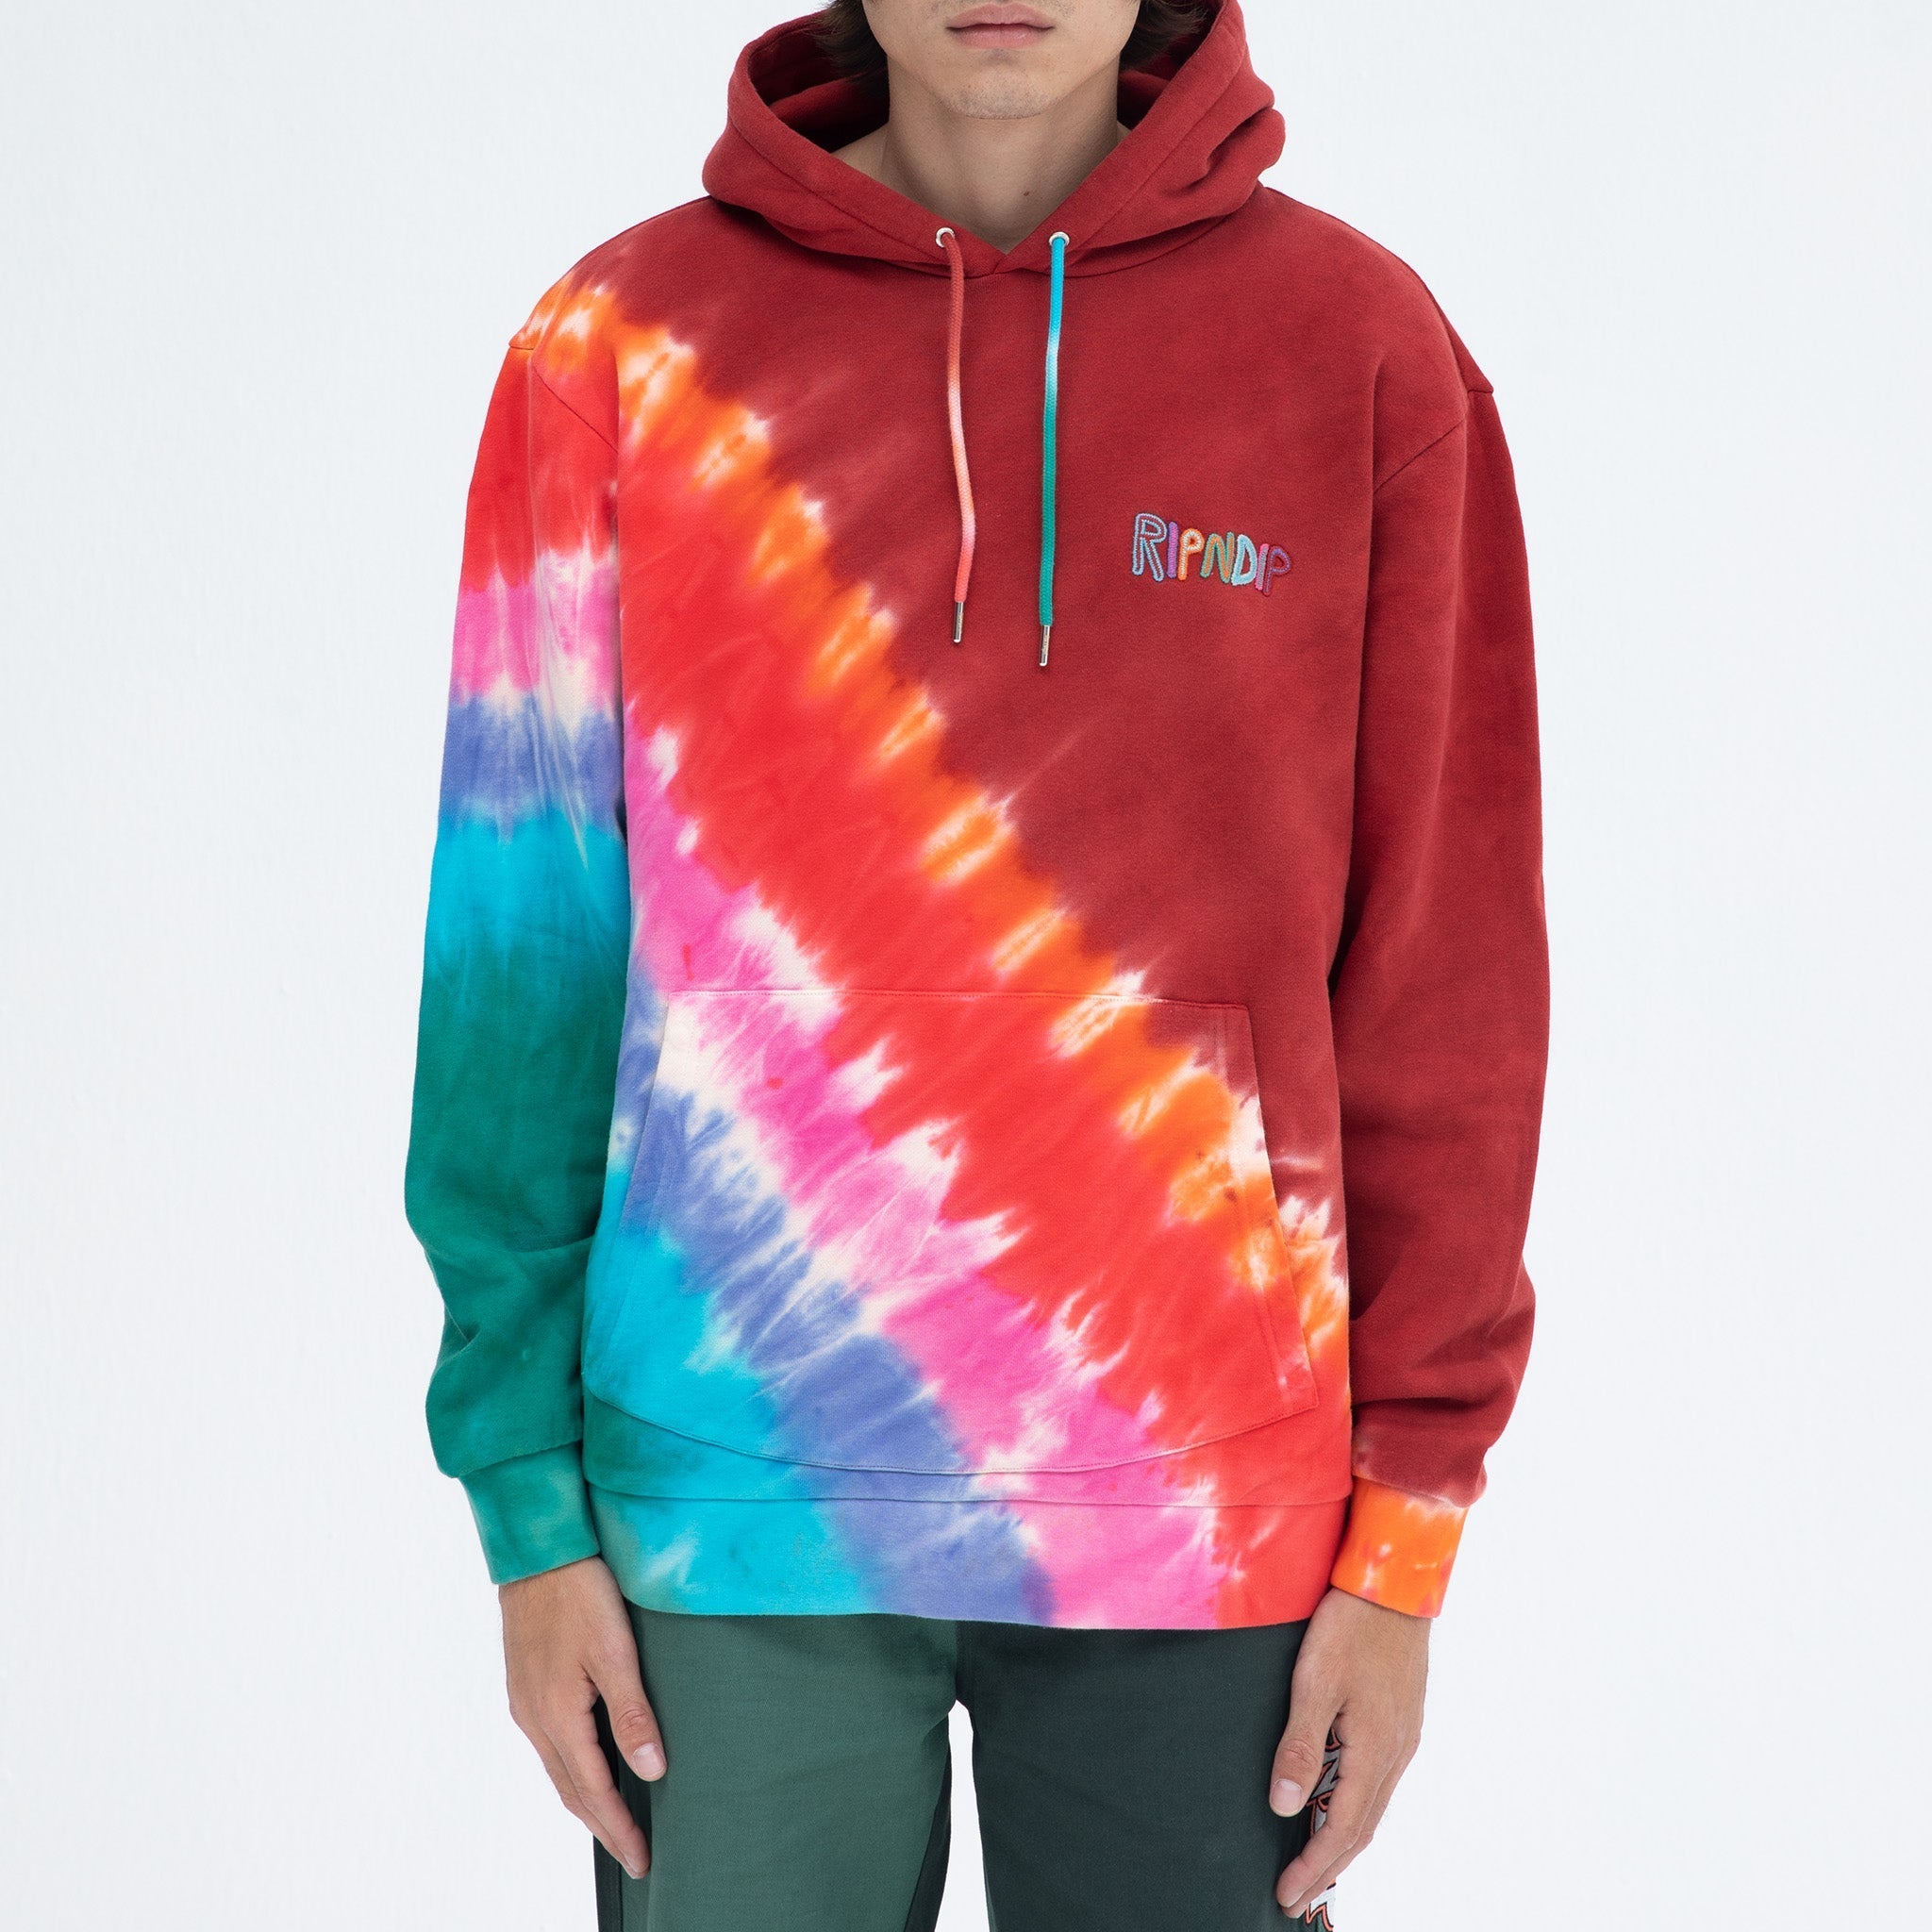 OG Prisma Embroidered Hoodie (Red Tie Dye)